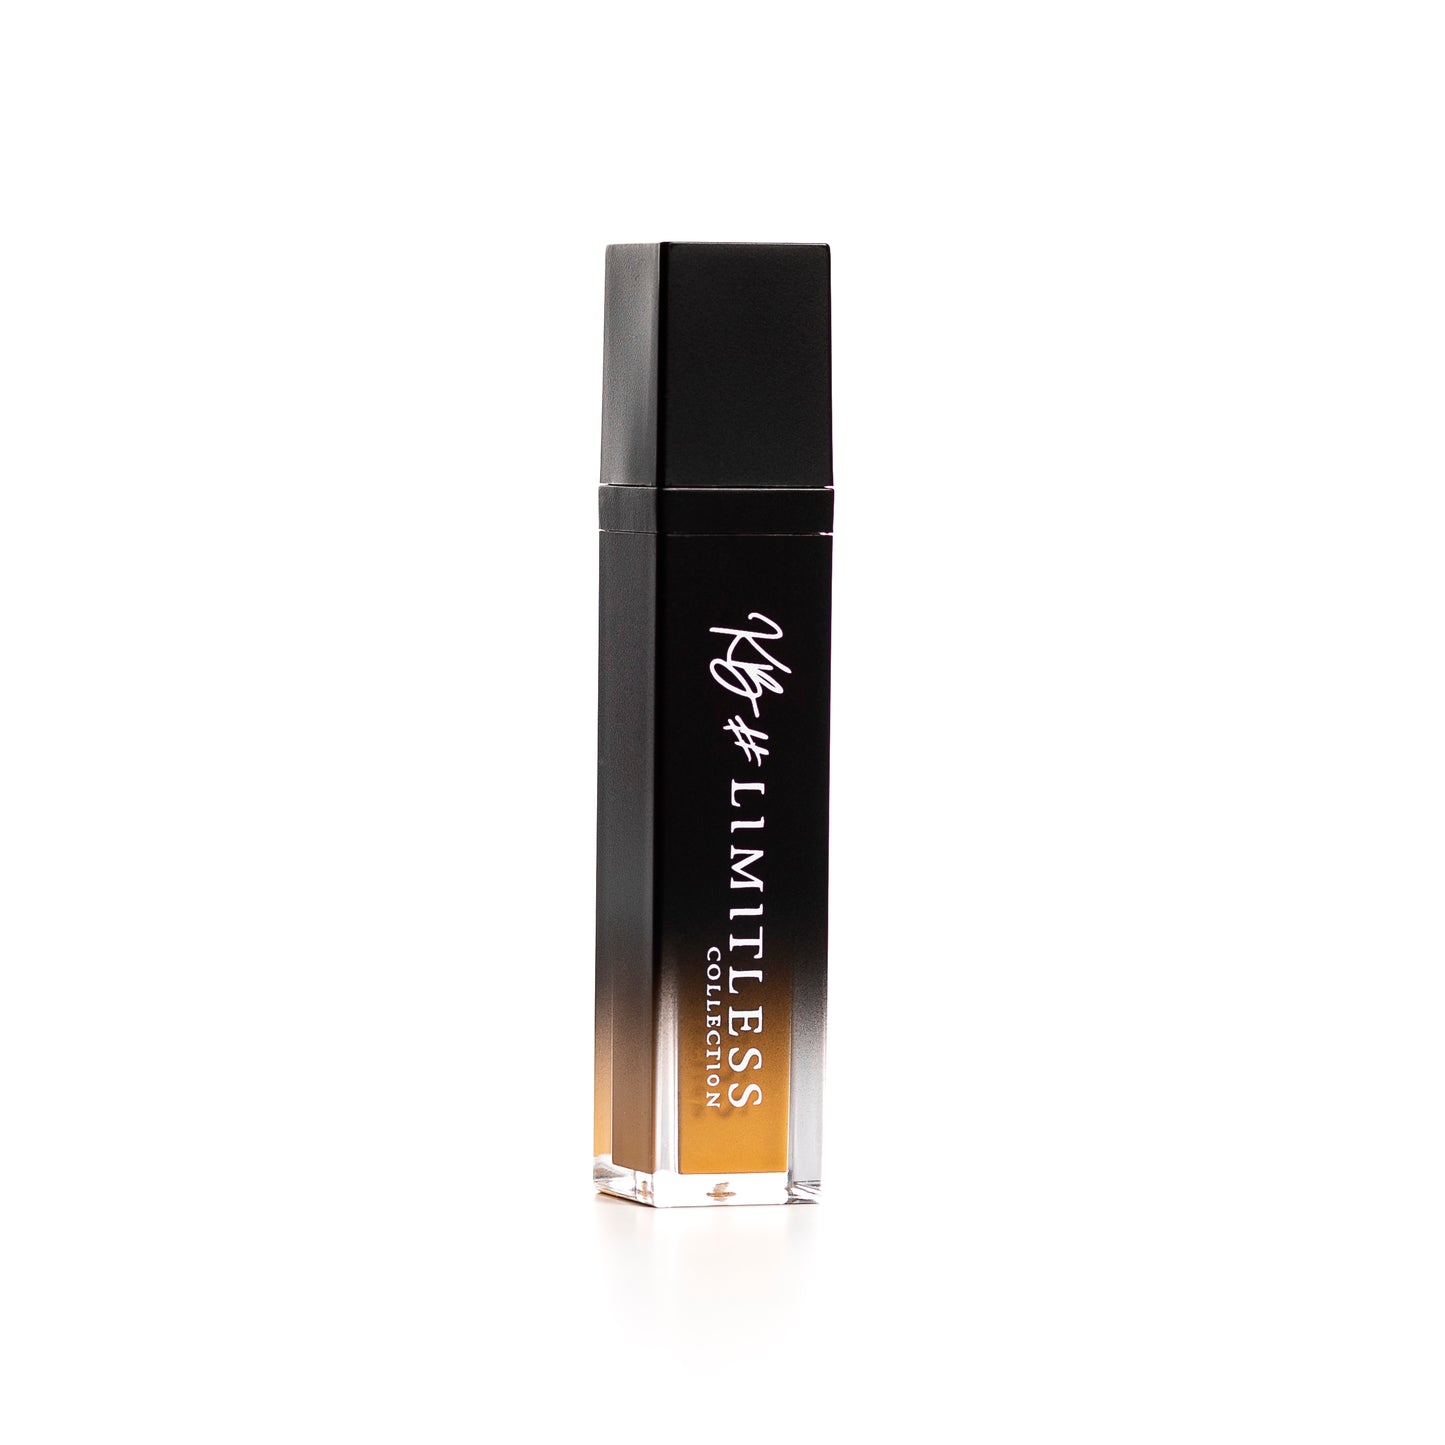 Creamy and Matte Yellow Lipstick that will last long and add on your limitless beauty